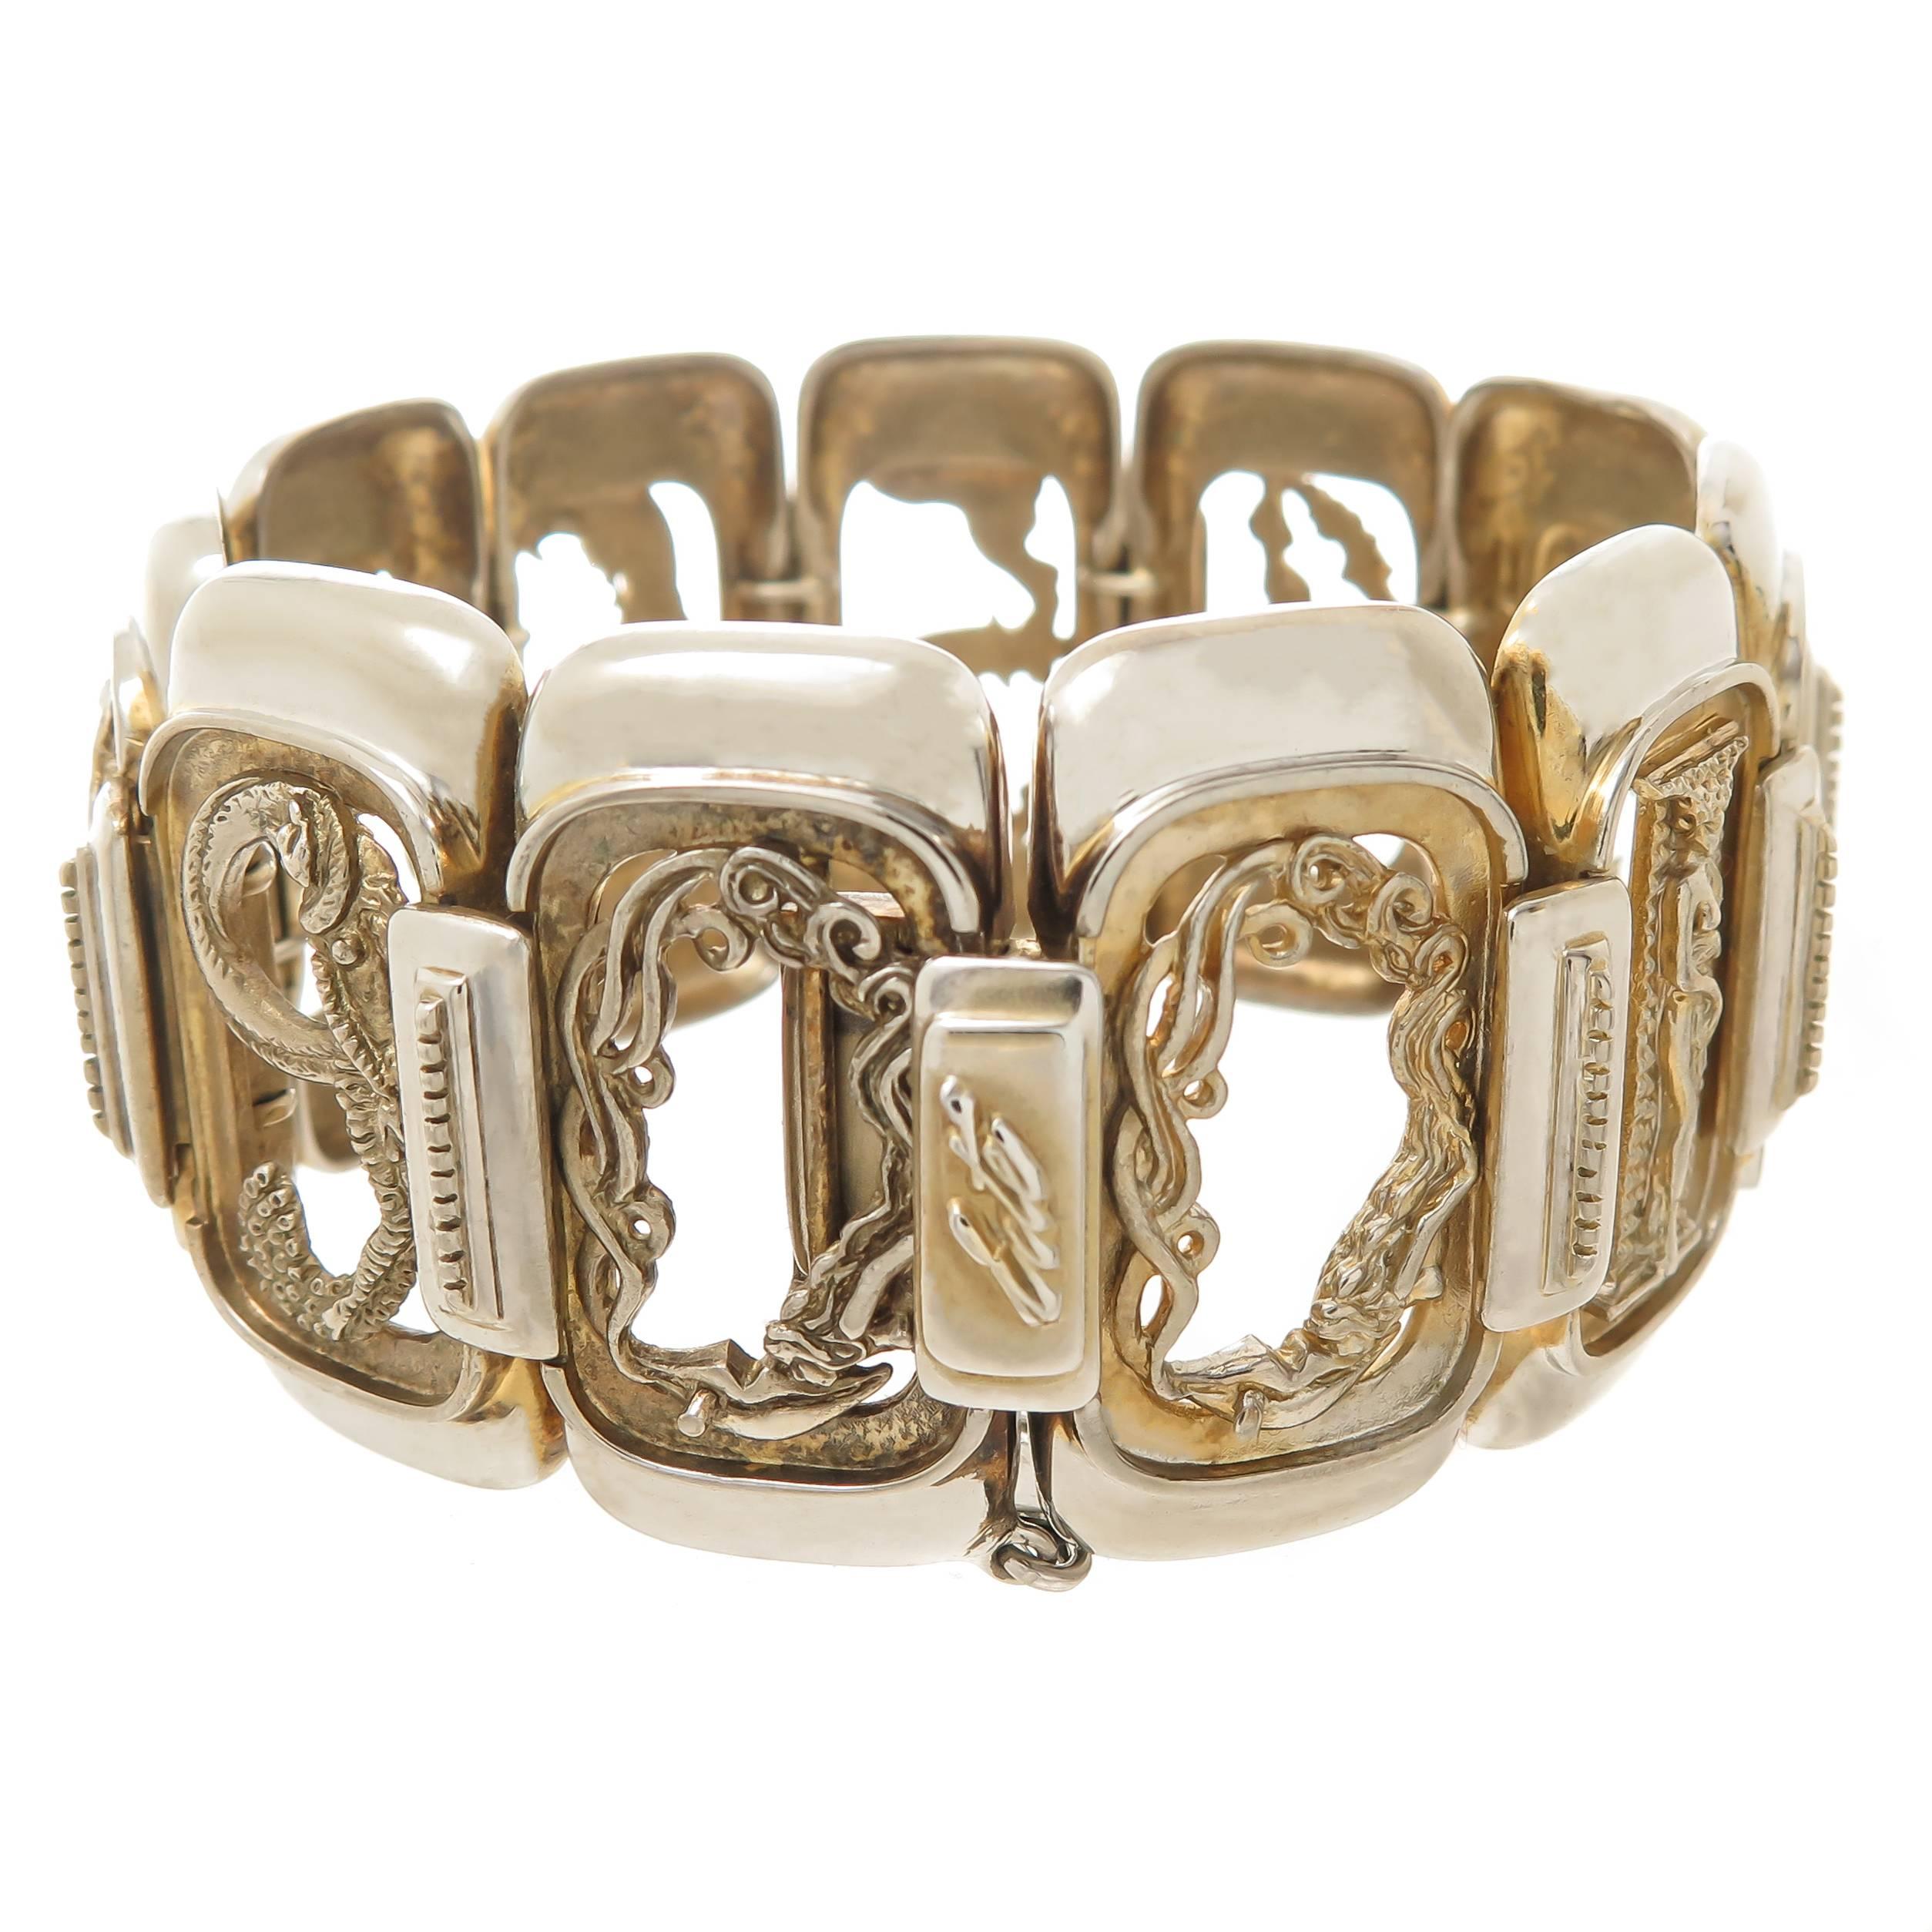 Circa 1980s Erte Sterling Silver Numbers Suite Bracelet in the Famous Erte Art Deco Style, measuring 7 1/2 inch in length and 1 3/8 inch wide. Signed, Numbered and also having the stamp of CFA Circle Fine Art Galleries. Comes in original